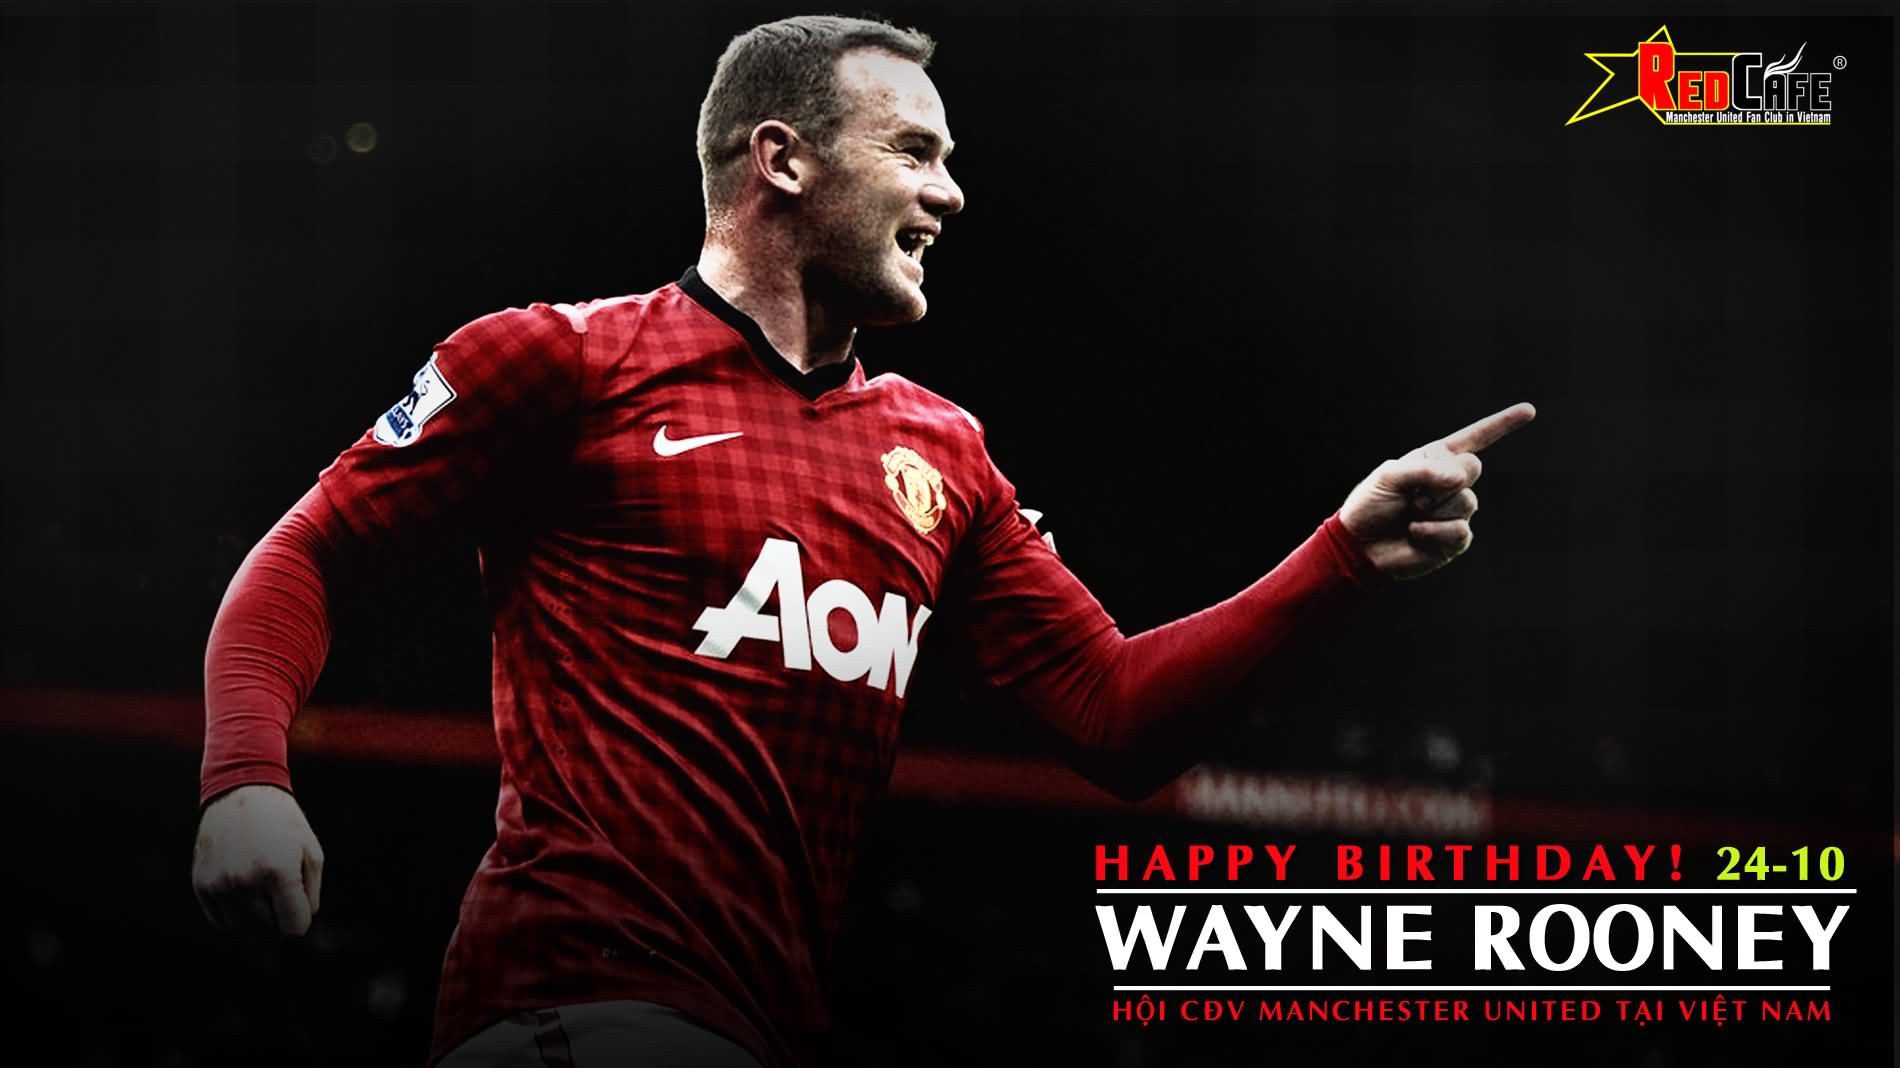 Hd Wallpaper Of Wayne Rooney | Imagefully.com | Images, Quotes ...